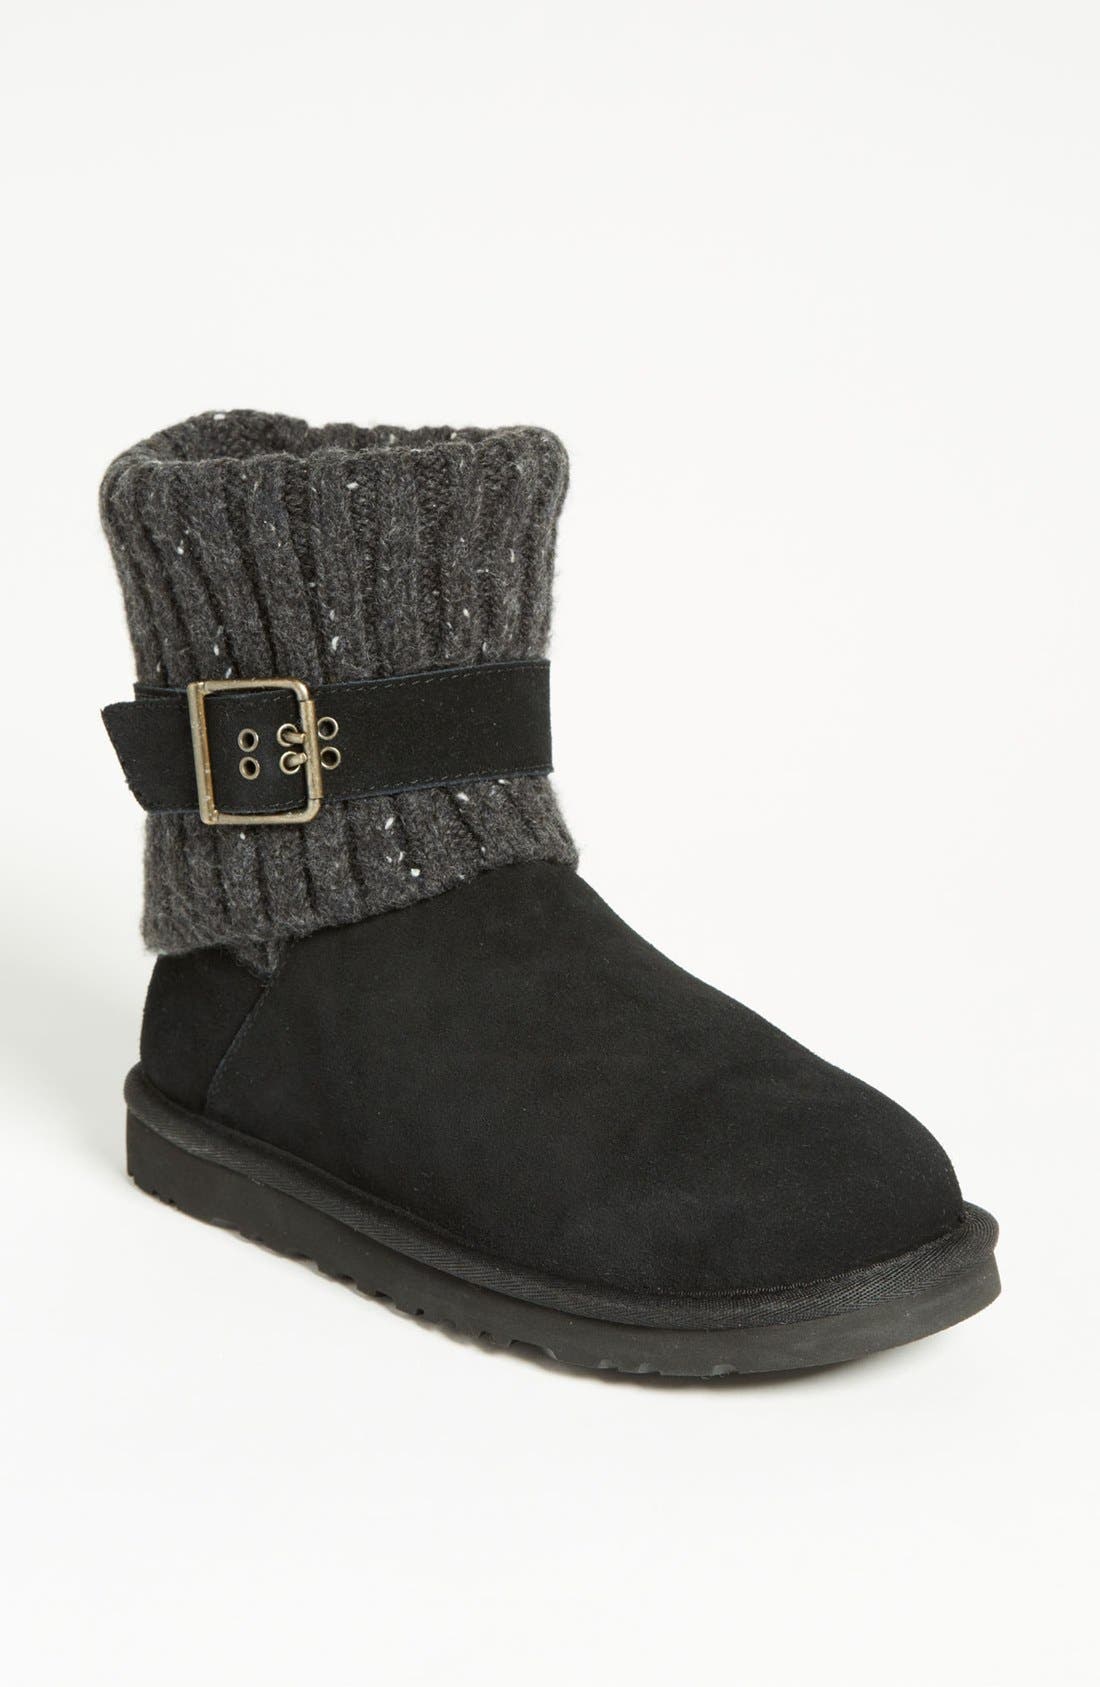 ugg boots with sweater cuff